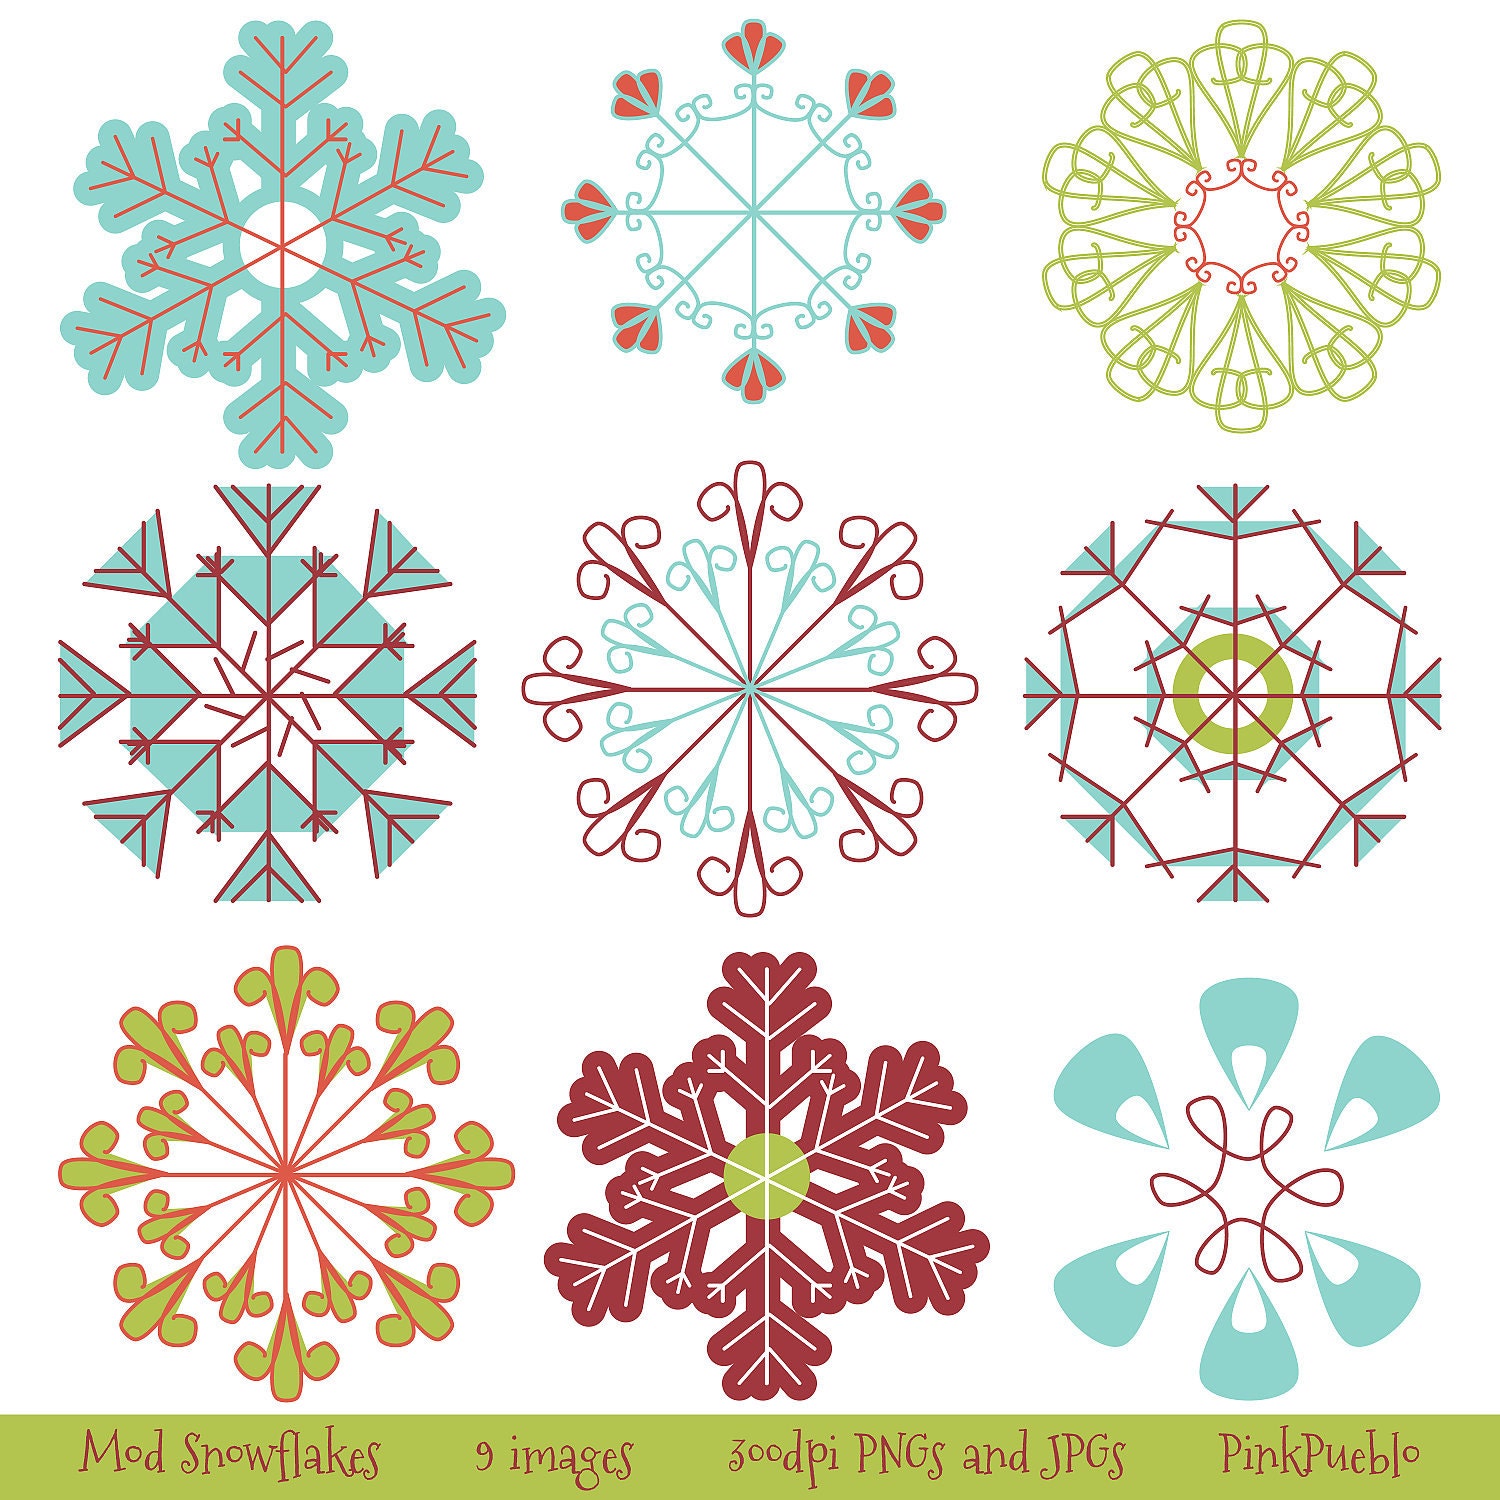 clipart of a snowflake - photo #40